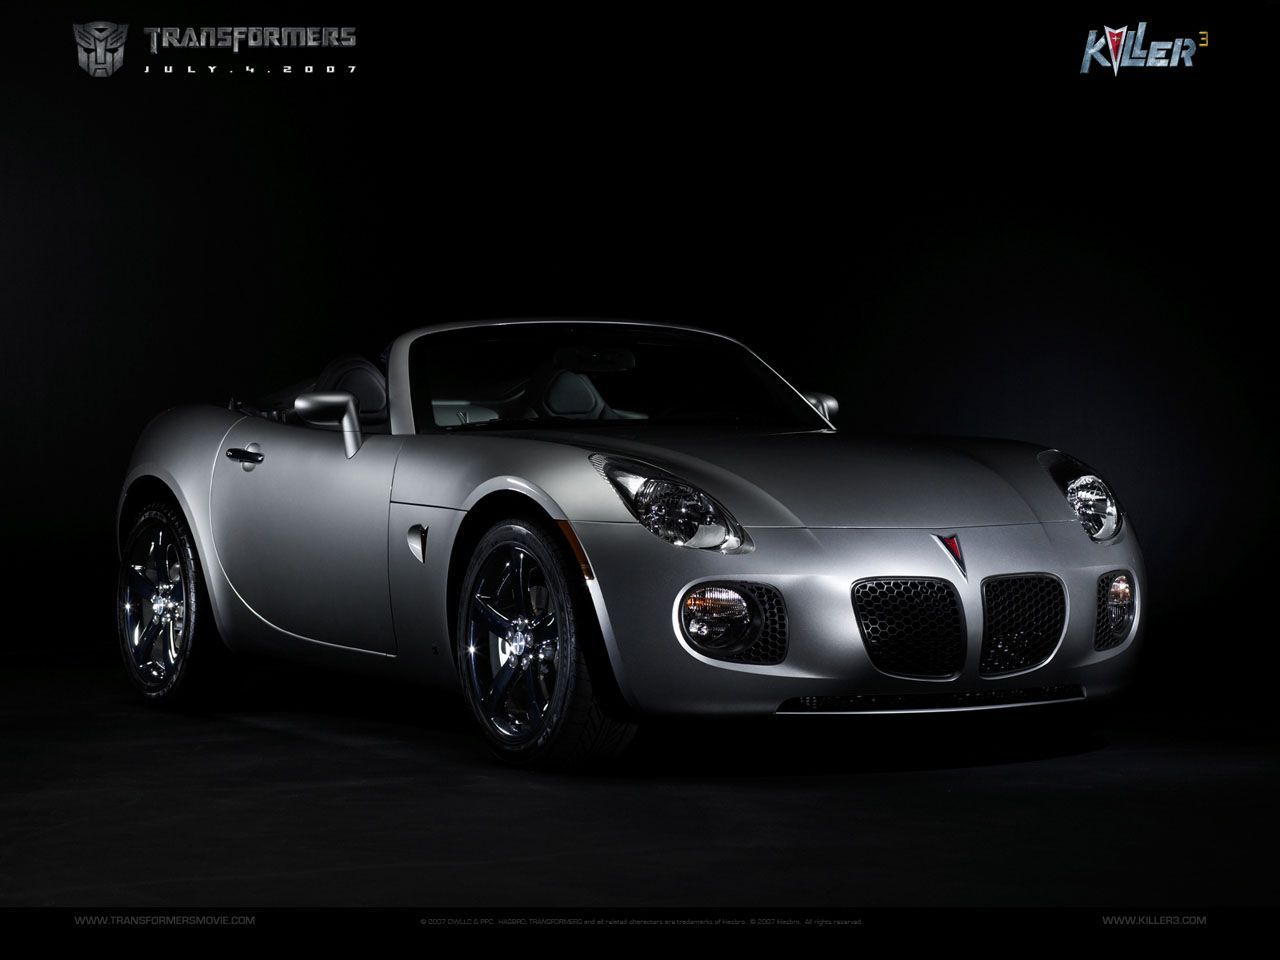 Pontiac Solstice. This is a discontinued beauty. Pontiac solstice, Transformers jazz, Transformers